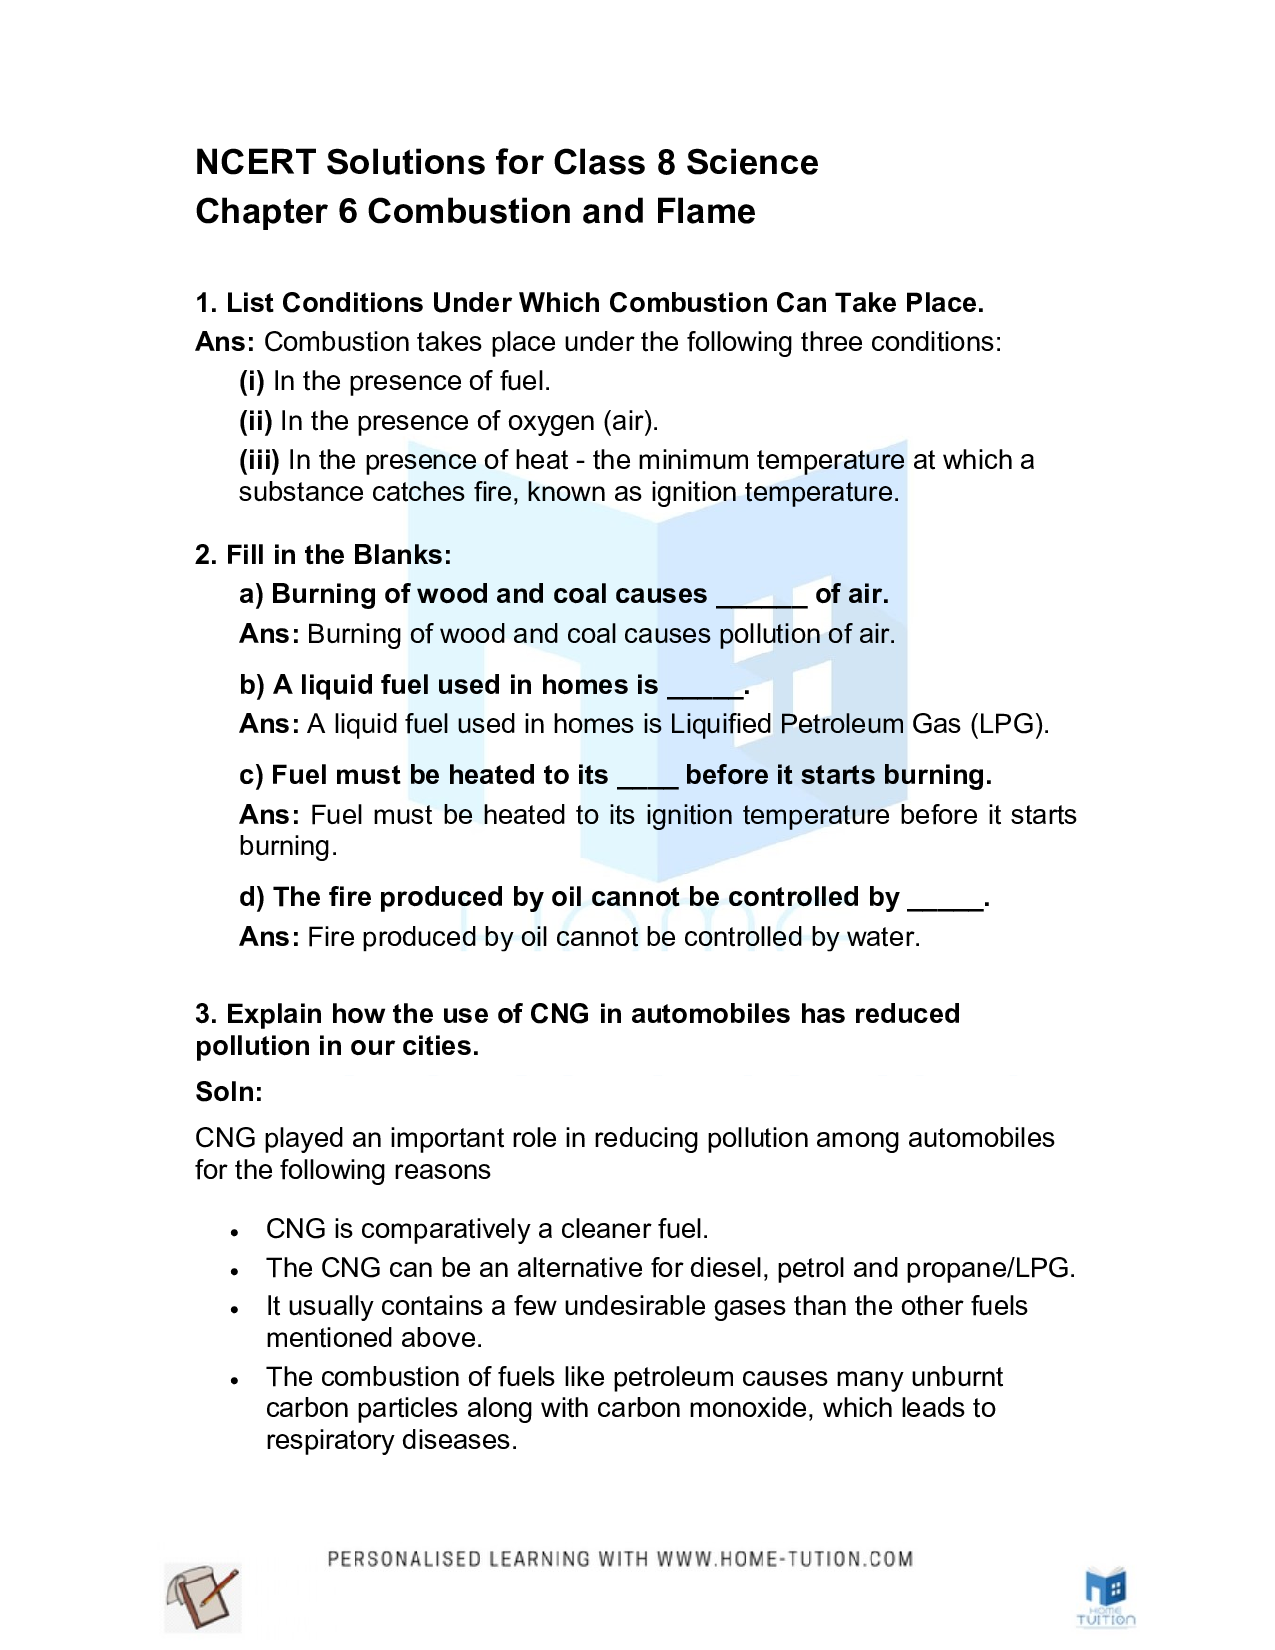 Class 8 Science Chapter 6 Combustion and Flame